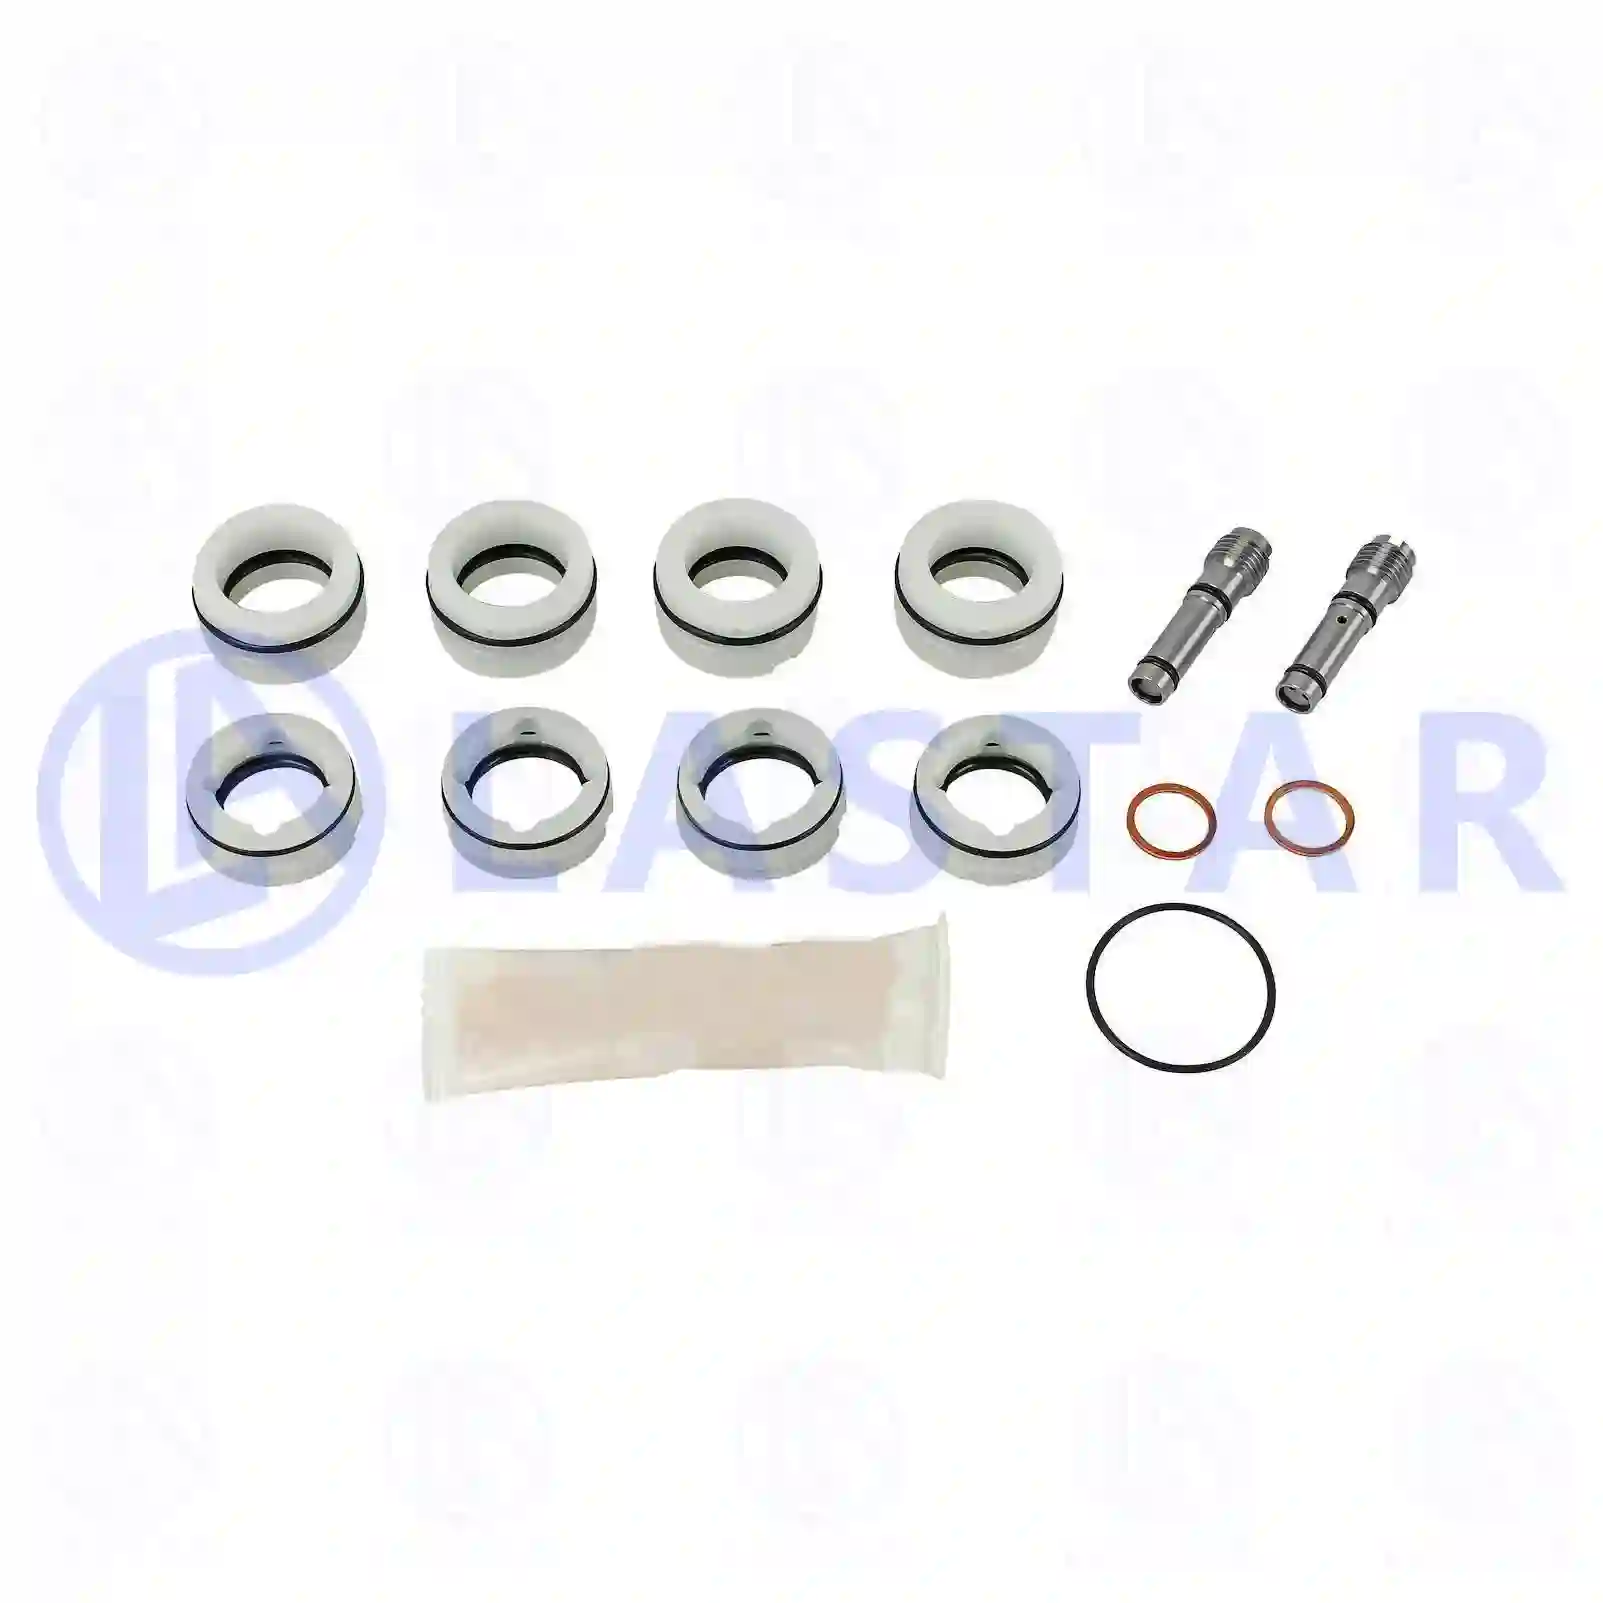 Repair kit, switching device, 77733122, 81326556157, 0002604998, ZG40169-0008 ||  77733122 Lastar Spare Part | Truck Spare Parts, Auotomotive Spare Parts Repair kit, switching device, 77733122, 81326556157, 0002604998, ZG40169-0008 ||  77733122 Lastar Spare Part | Truck Spare Parts, Auotomotive Spare Parts